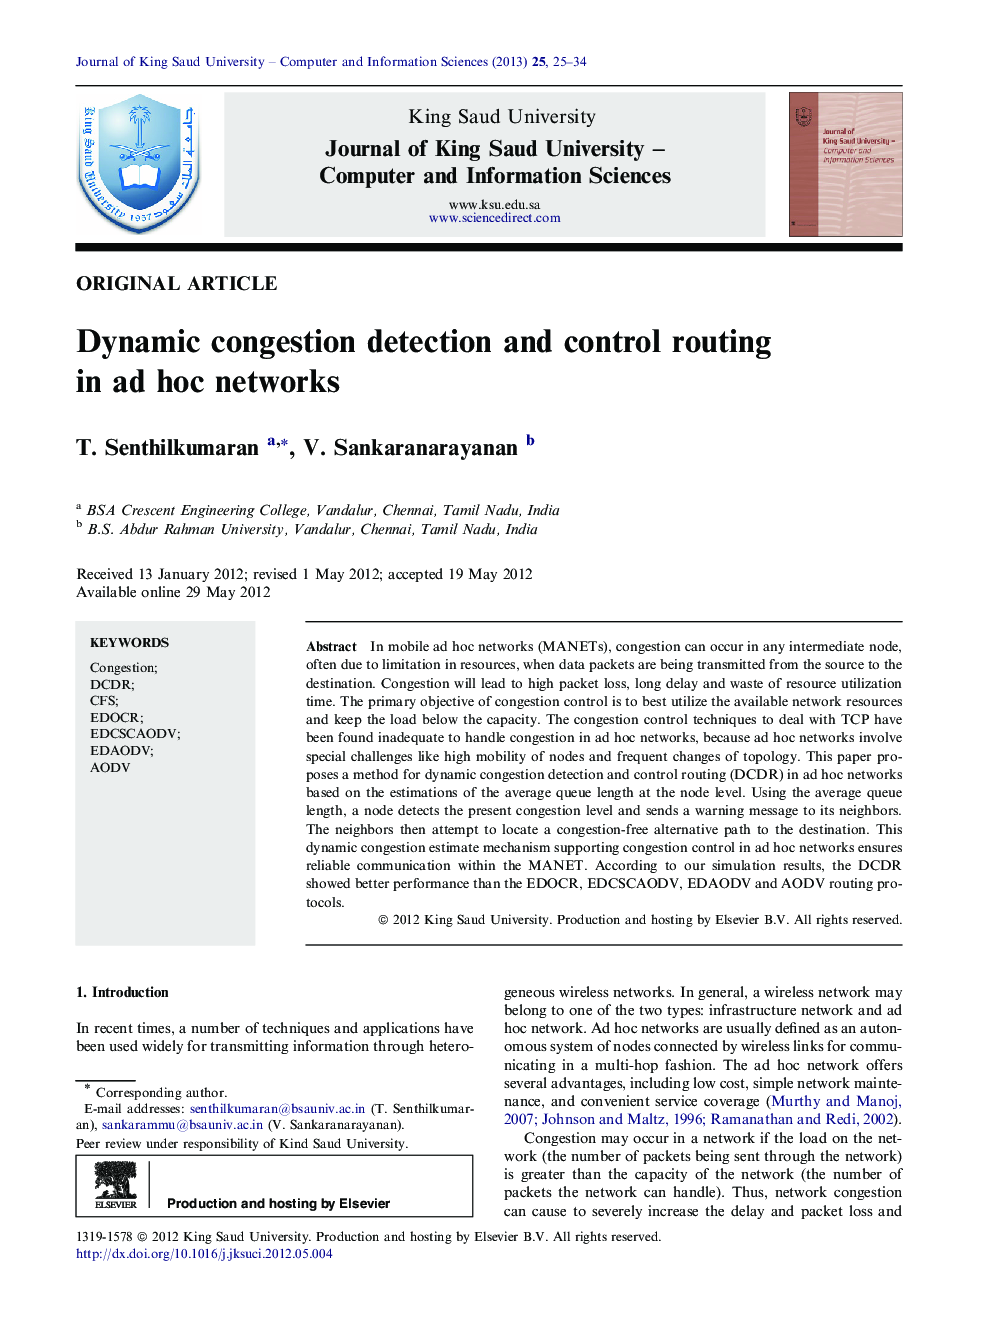 Dynamic congestion detection and control routing in ad hoc networks 